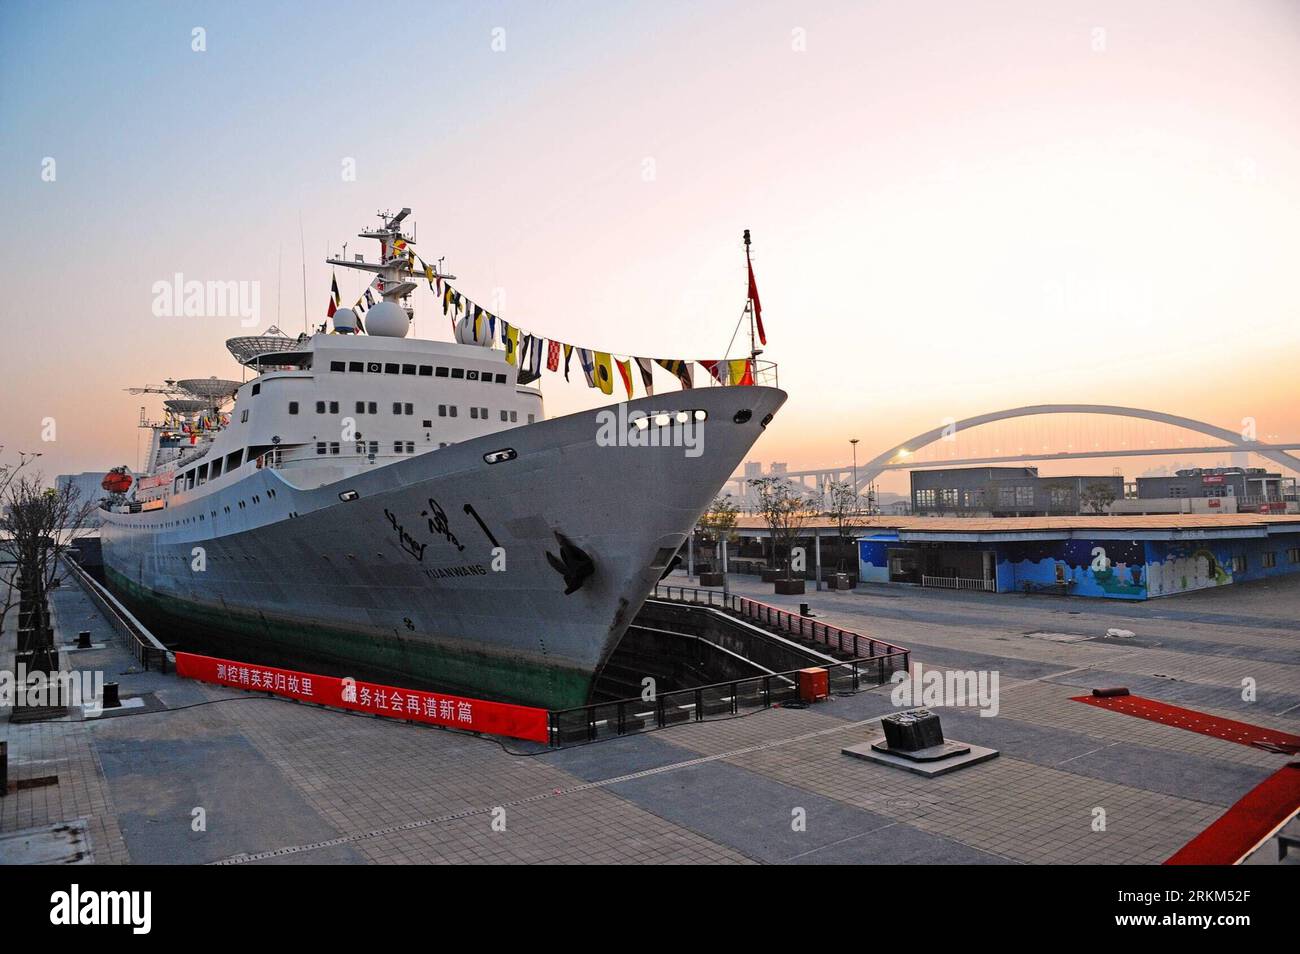 Bildnummer: 56516614  Datum: 27.11.2011  Copyright: imago/Xinhua (111127) -- SHANGHAI, Nov. 27, 2011 (Xinhua) -- The Yuanwang I Space Tracking Ship moors at the World Expo Park in Shanghai, east China, Nov. 27, 2011. Yuanwang I , China s first vessel for tracking and controlling rockets and spacecrafts that was retired in 2010 after 32 years on service, was moved to Shanghai s World Expo Park on Saturday. The vessel will serve as a museum for scientific eduction. (Xinhua/Guo Changyao) (ljh) CHINA-SHANGHAI- YUANWANG I -WORLD EXPO PARK-MOVE-IN (CN) PUBLICATIONxNOTxINxCHN Gesellschaft Museum Muse Stock Photo